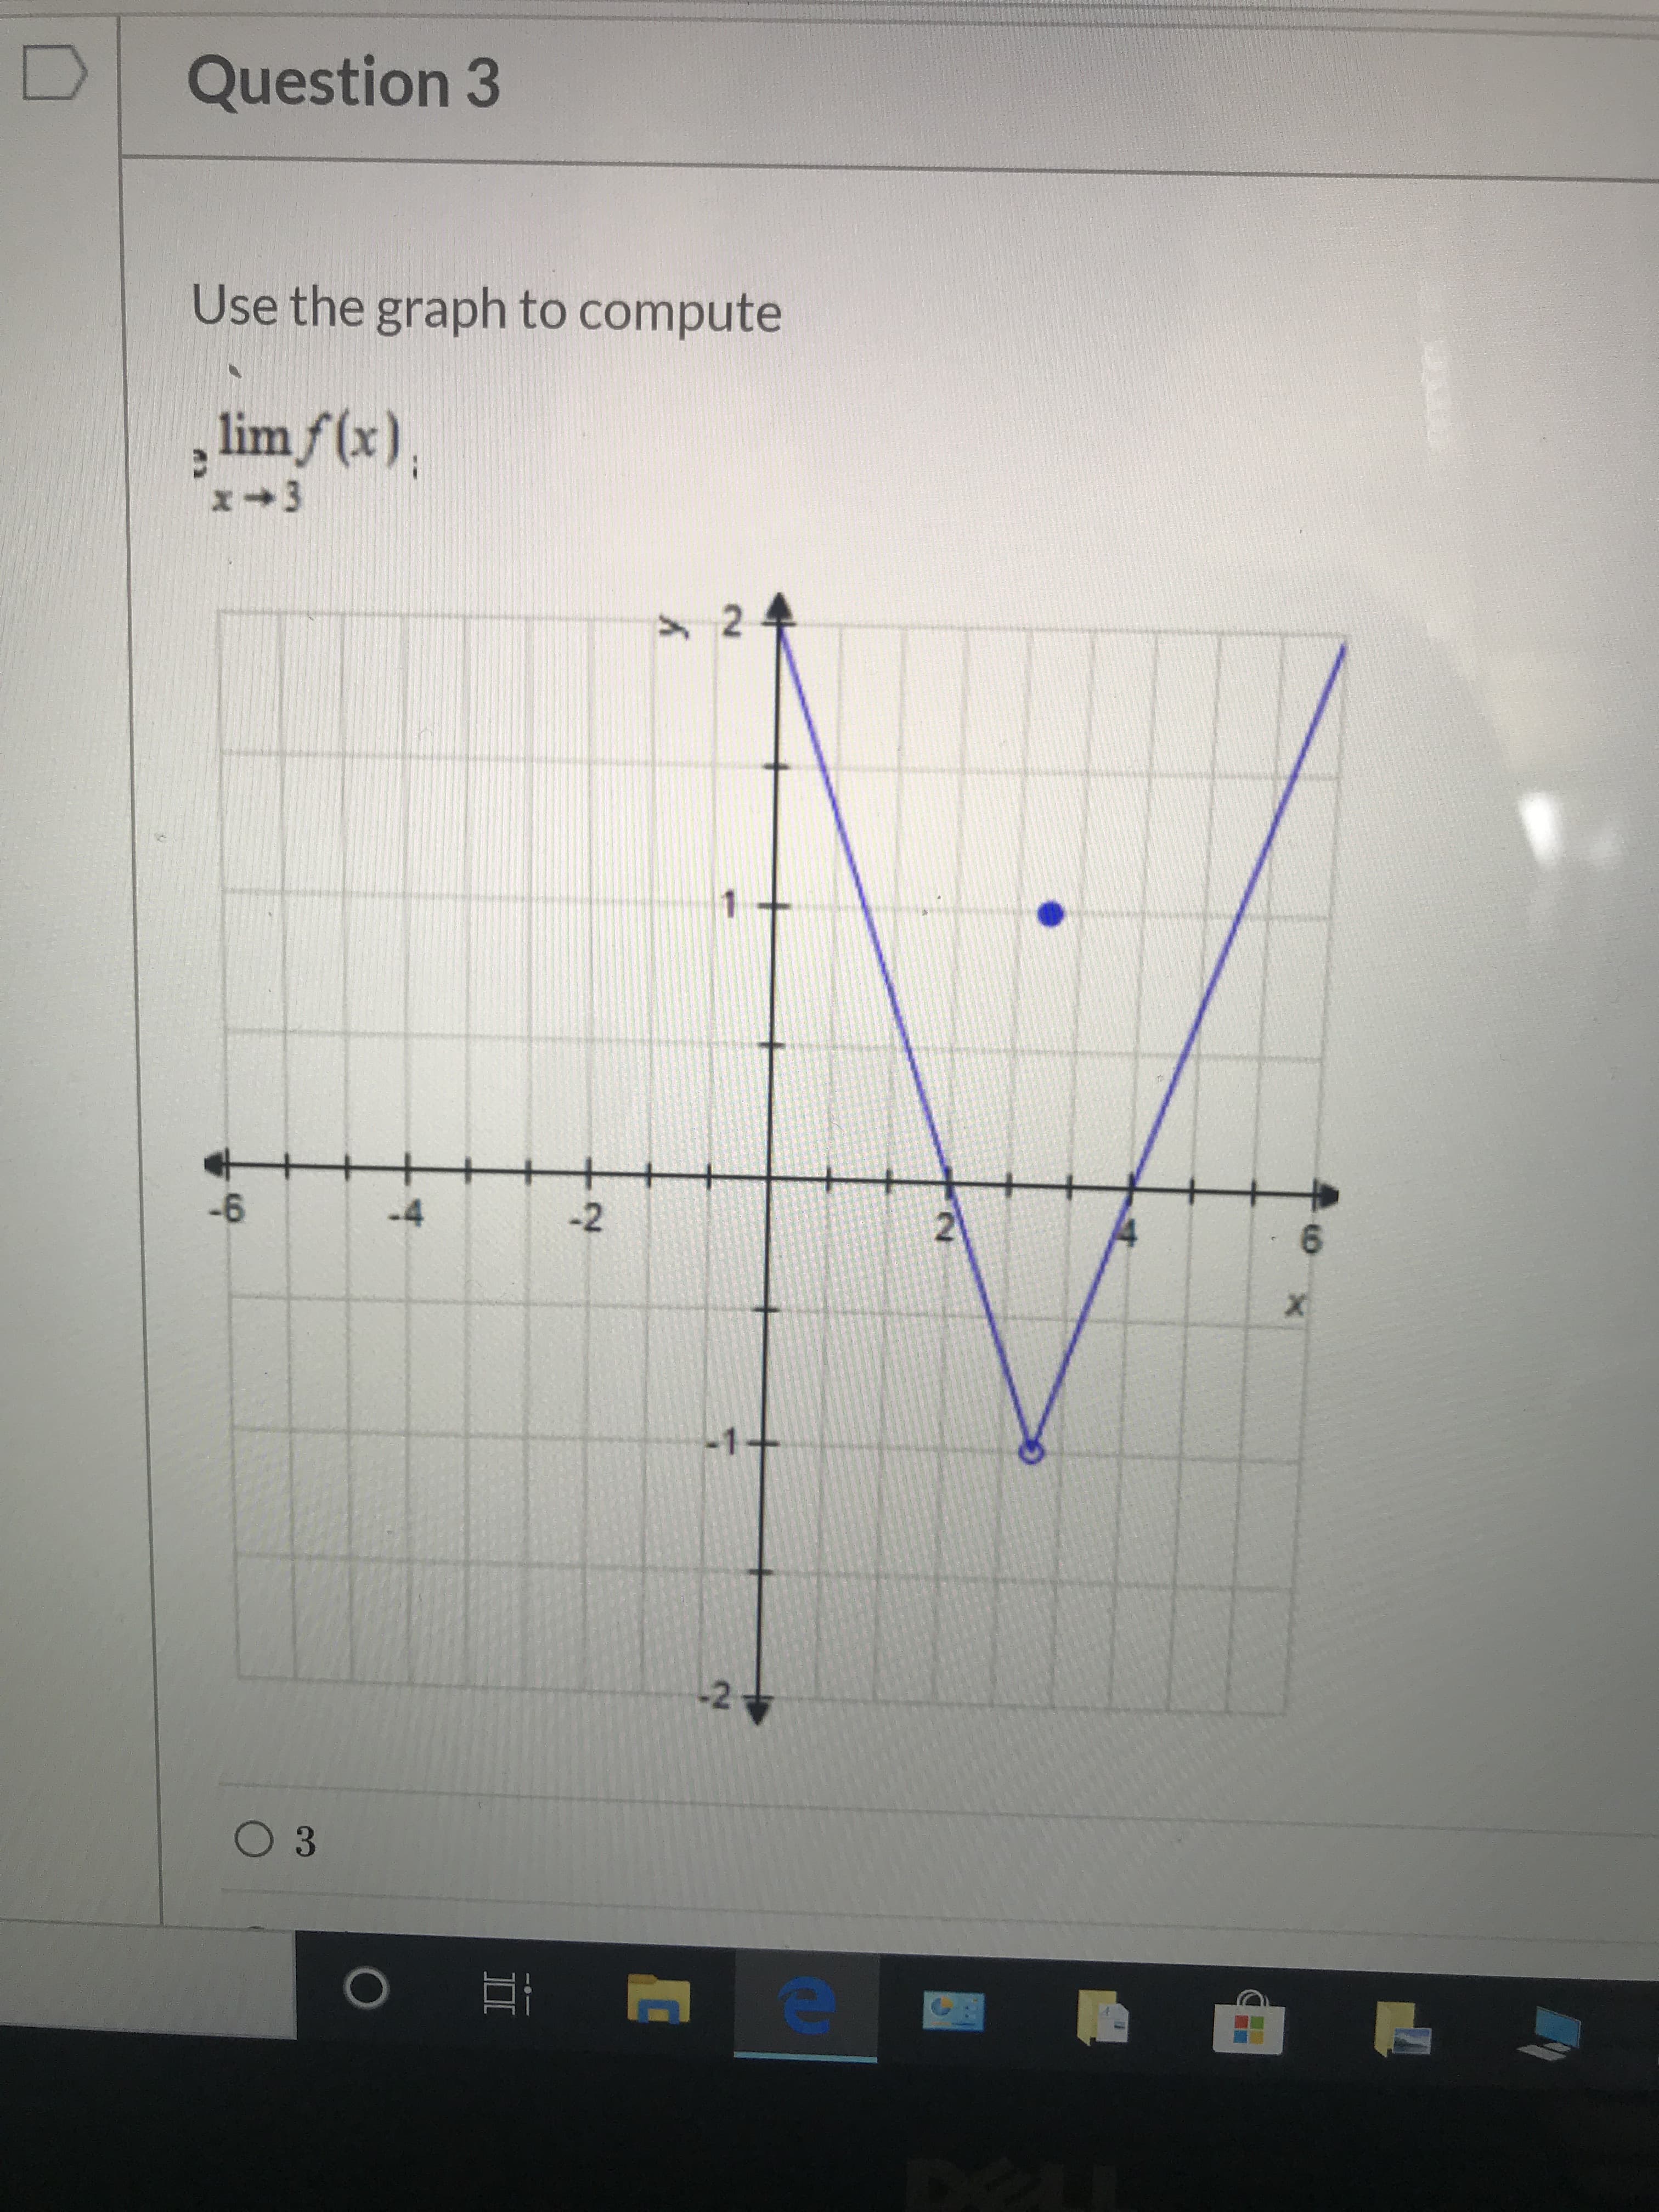 Use the graph to compute
lim f(x),
